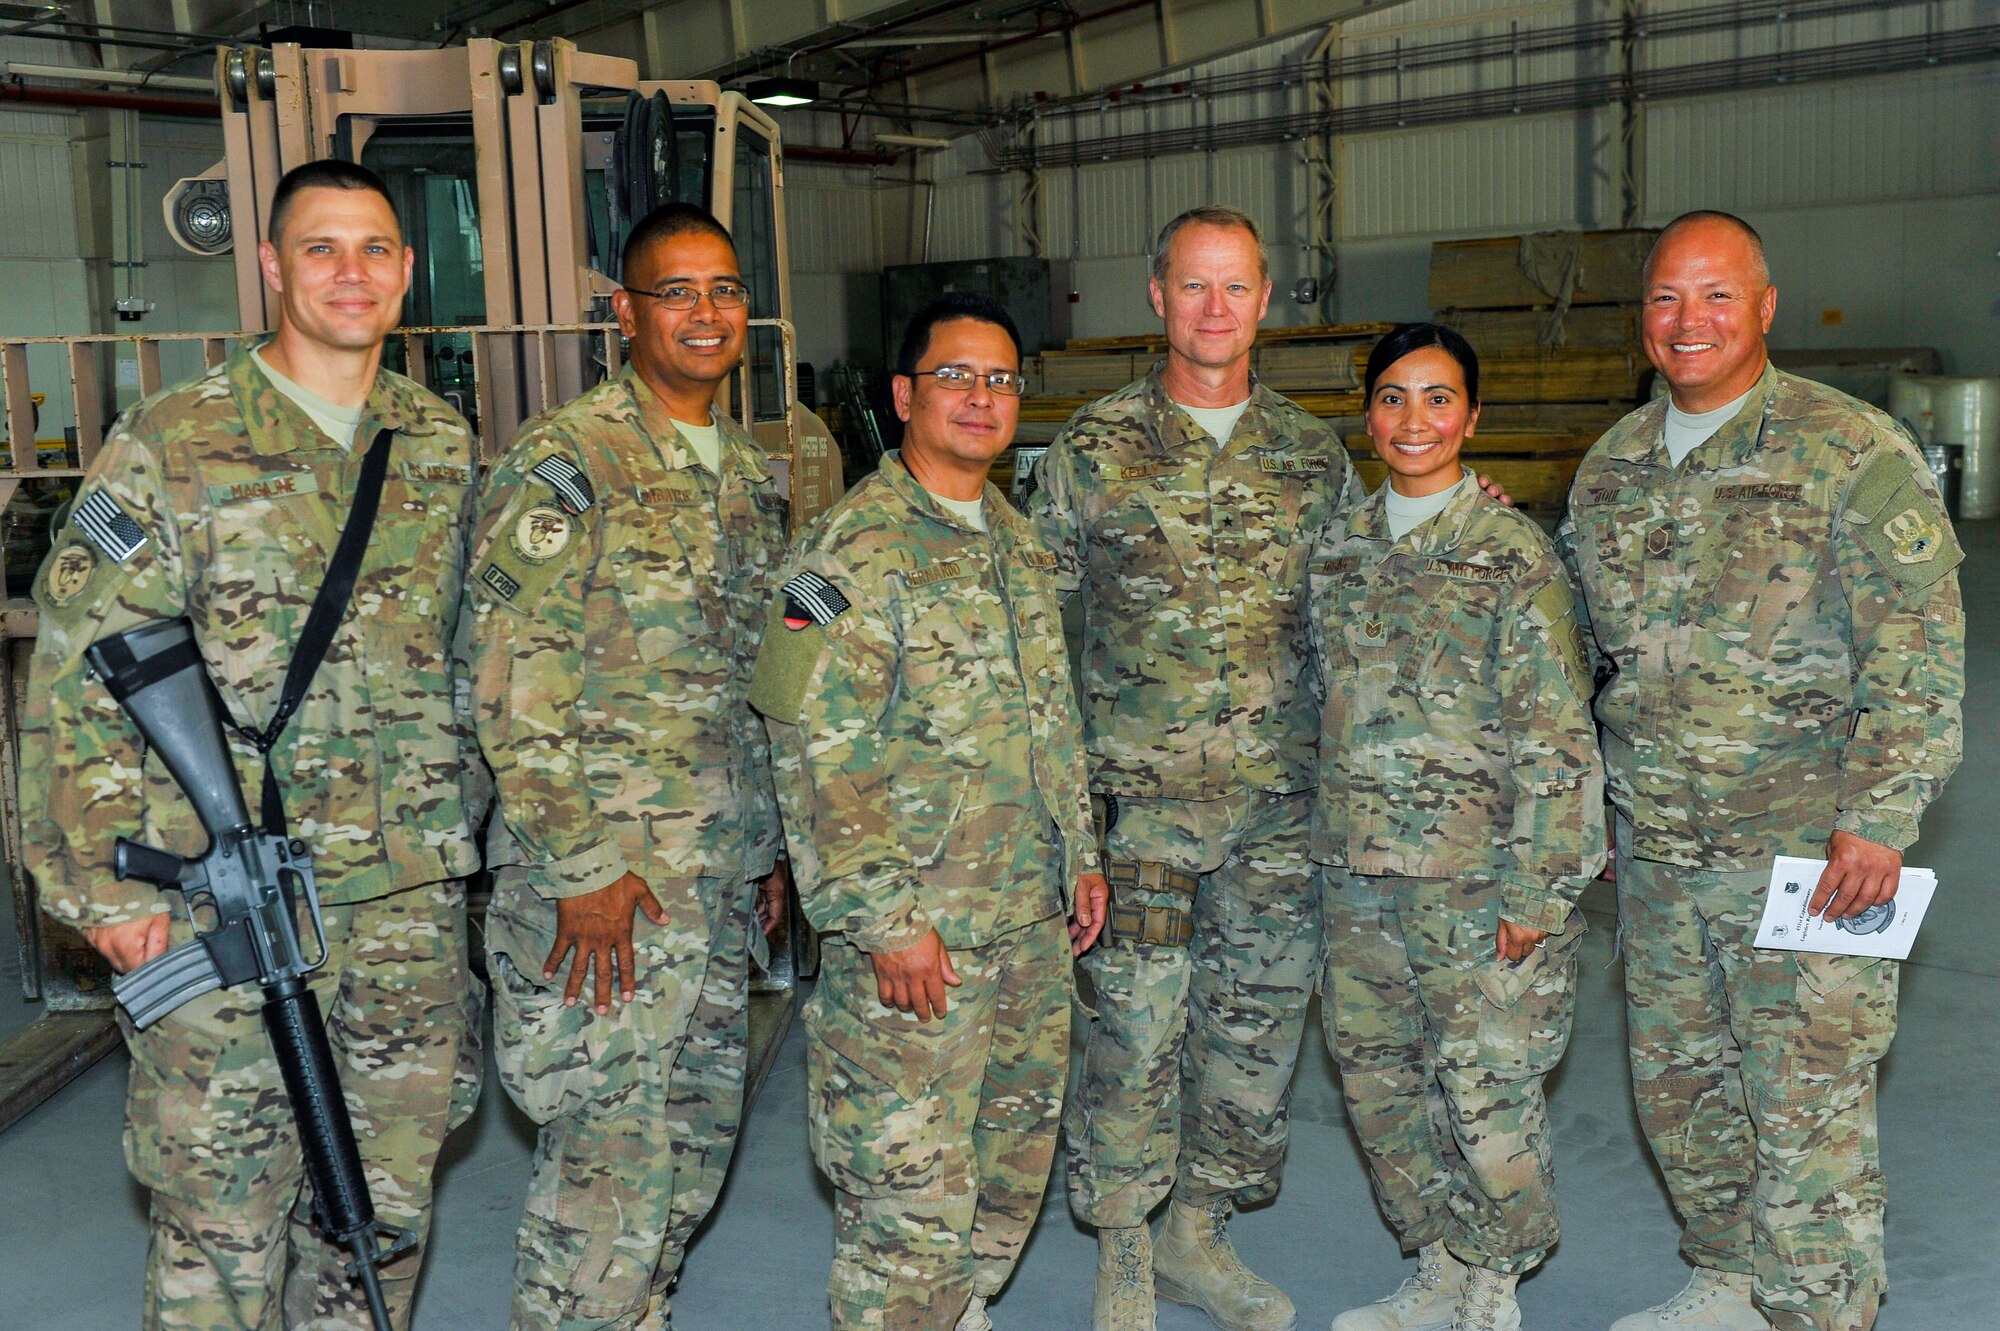 U.S. Air Force Brig. Gen. Mark D. Kelly, 455th Air Expeditionary Wing commander, takes a group photo with Airmen assigned to the 451st Air Expeditionary Group during a visit to Kandahar Airfield, Afghanistan, May 3, 2015.  The general along with Chief Master Sgt. Jeffery Brown, 455th AEW command chief, met with Airmen from across the group who provide intelligence, surveillance and reconnaissance, command and control, personnel recovery, and airborne datalink capabilities to commanders in the Afghanistan theater of operations. (U.S. Air Force photo by Maj. Tony Wickman/Released)